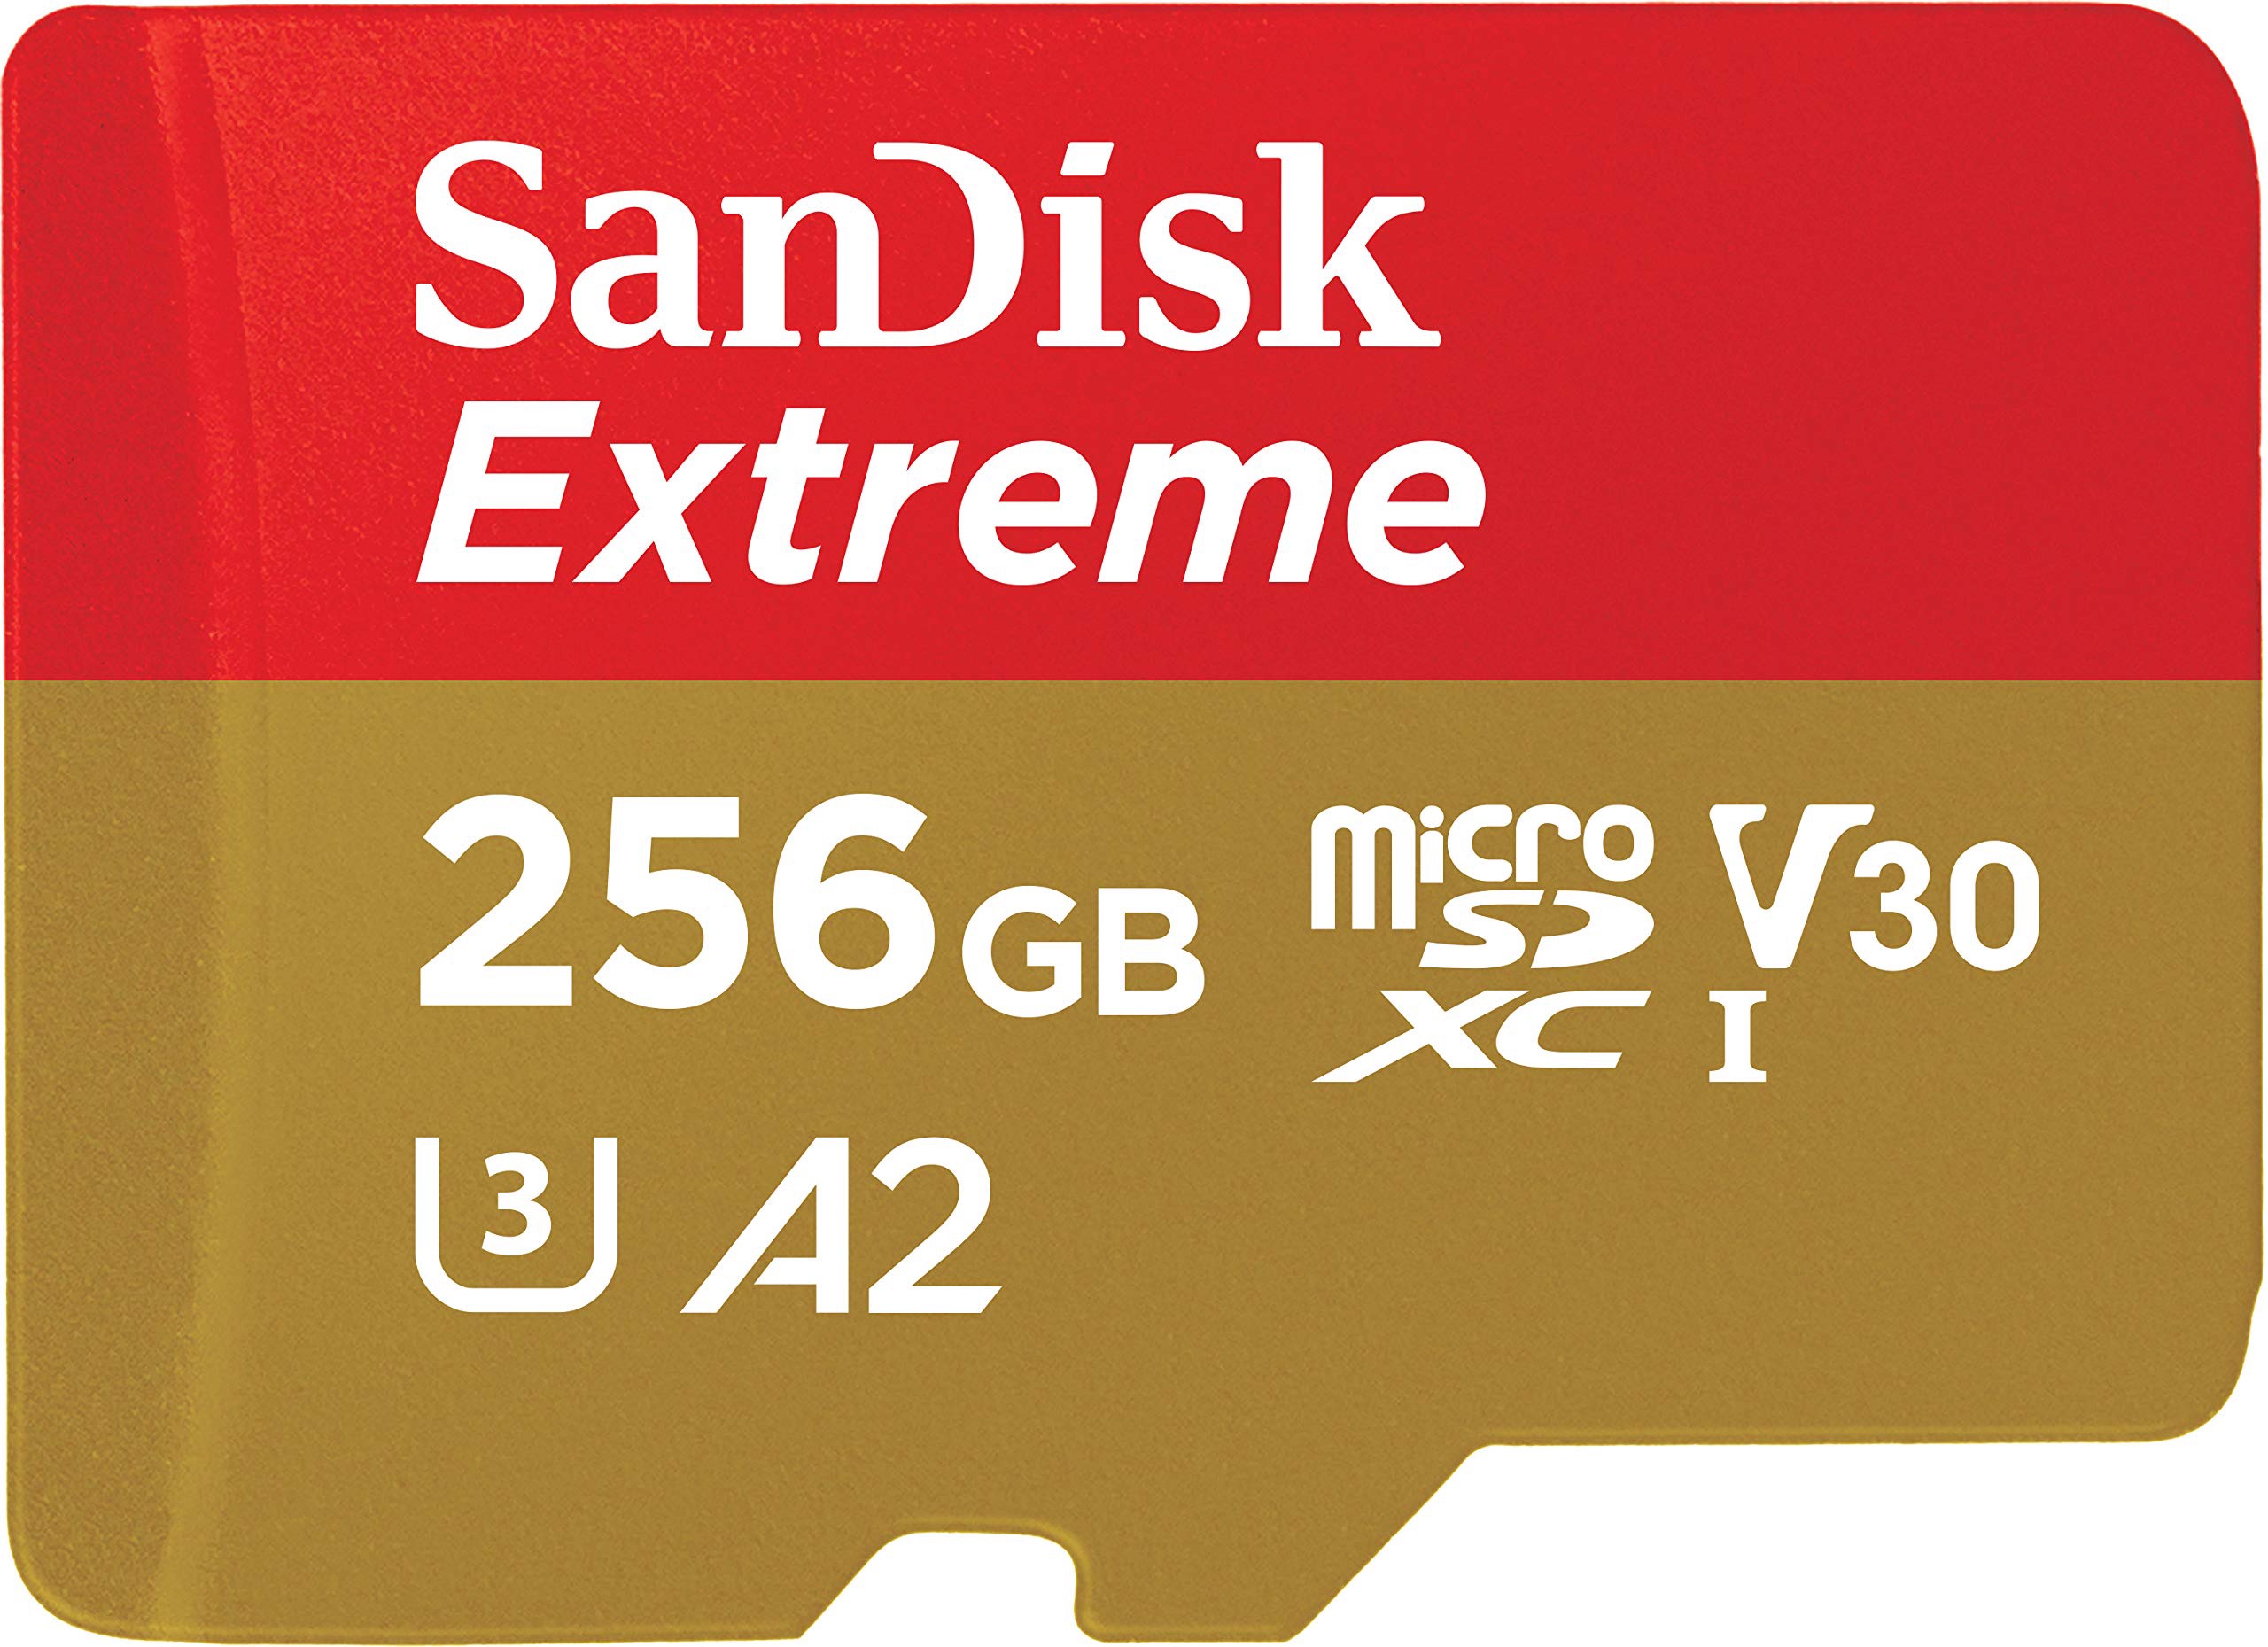 Amazon.com: SanDisk 256GB Extreme MicroSDXC UHS-I Memory Card with Adapter - C10, U3, V30, 4K, A2, Micro SD - SDSQXA1-256G-GN6MA: Computers & Accessories内存卡